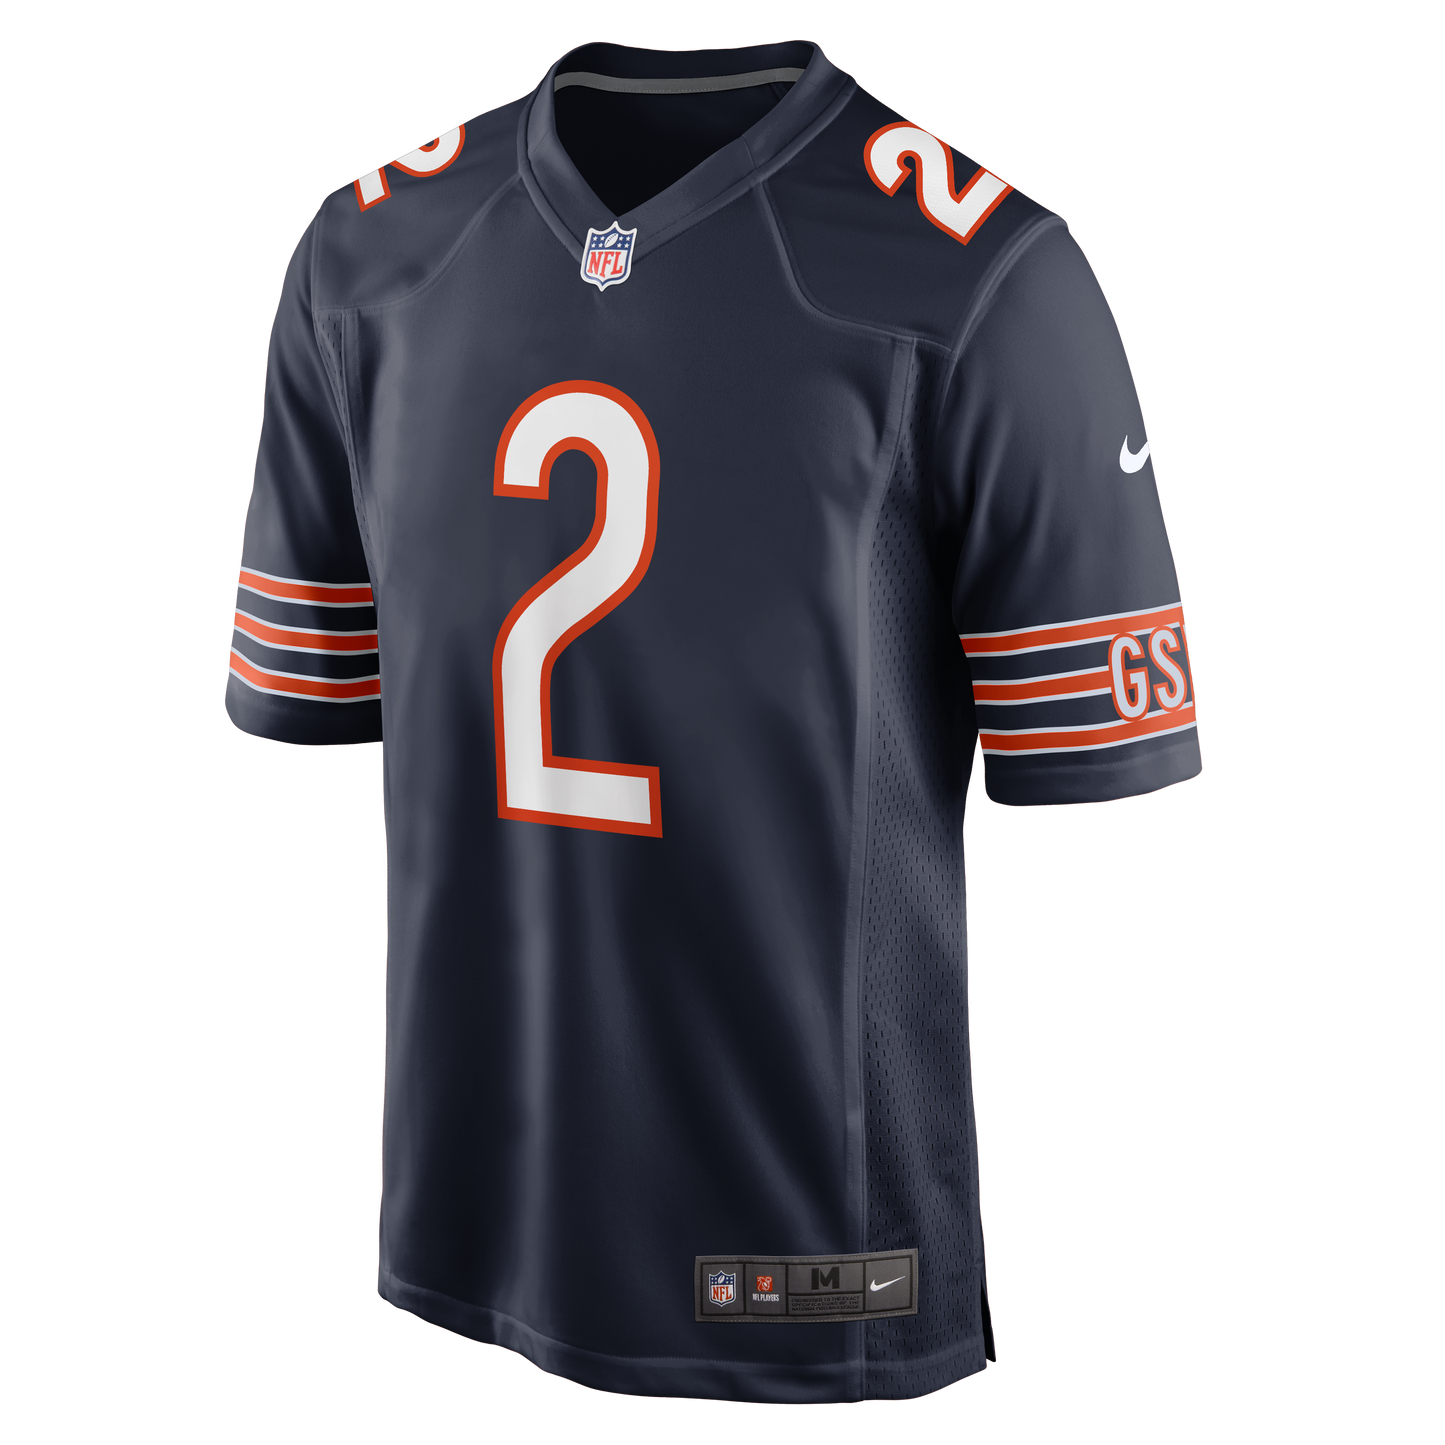 D.J. Moore Chicago Bears Nike Navy Replica Game Jersey